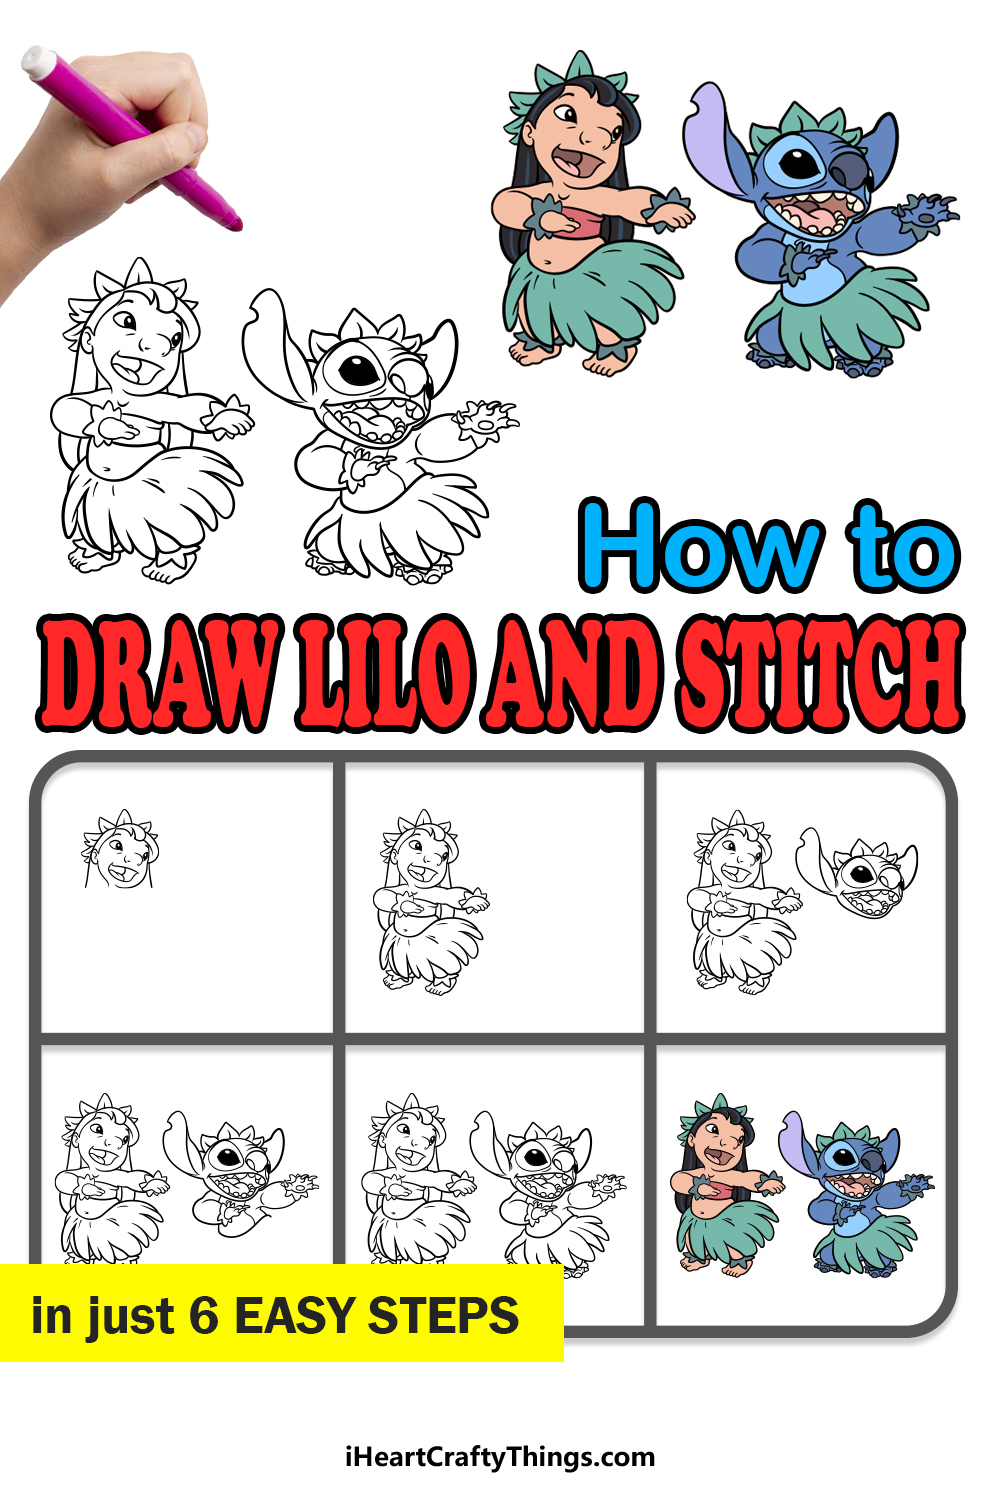 how to draw Lilo and Stitch in 6 easy steps